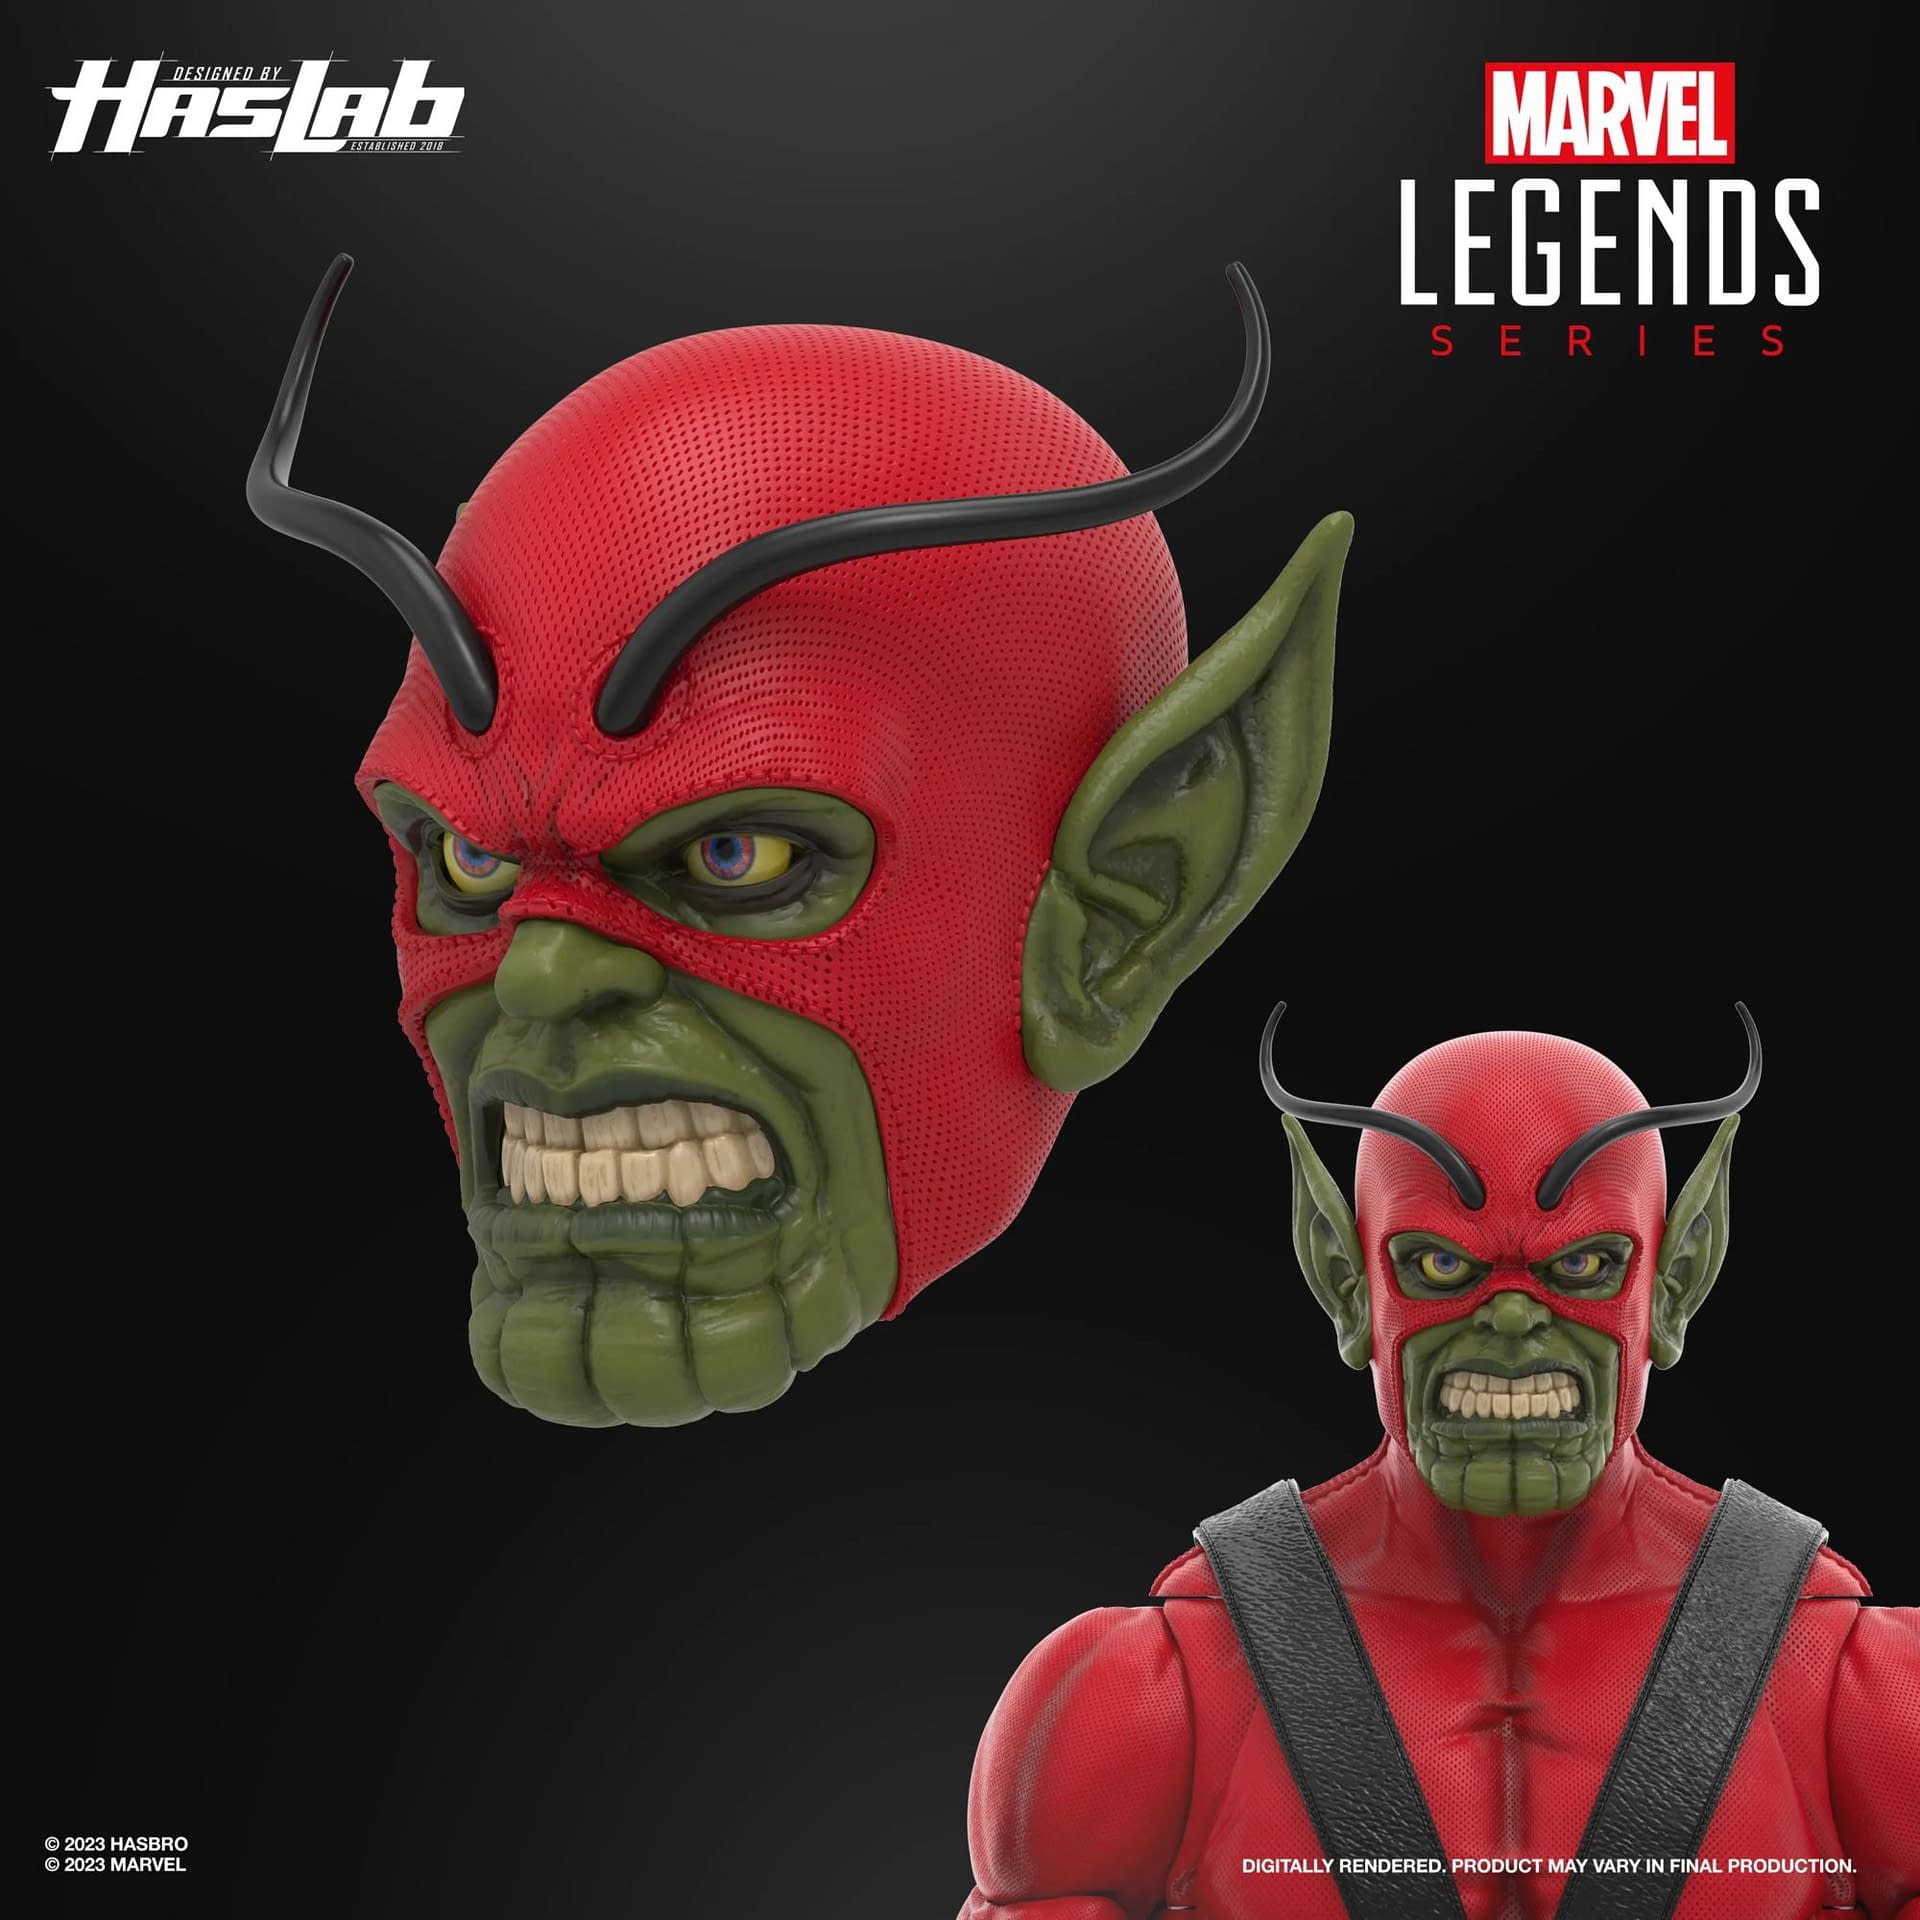 Grow Your Marvel Legends Collection with Hasbro's Giant-Man HasLab